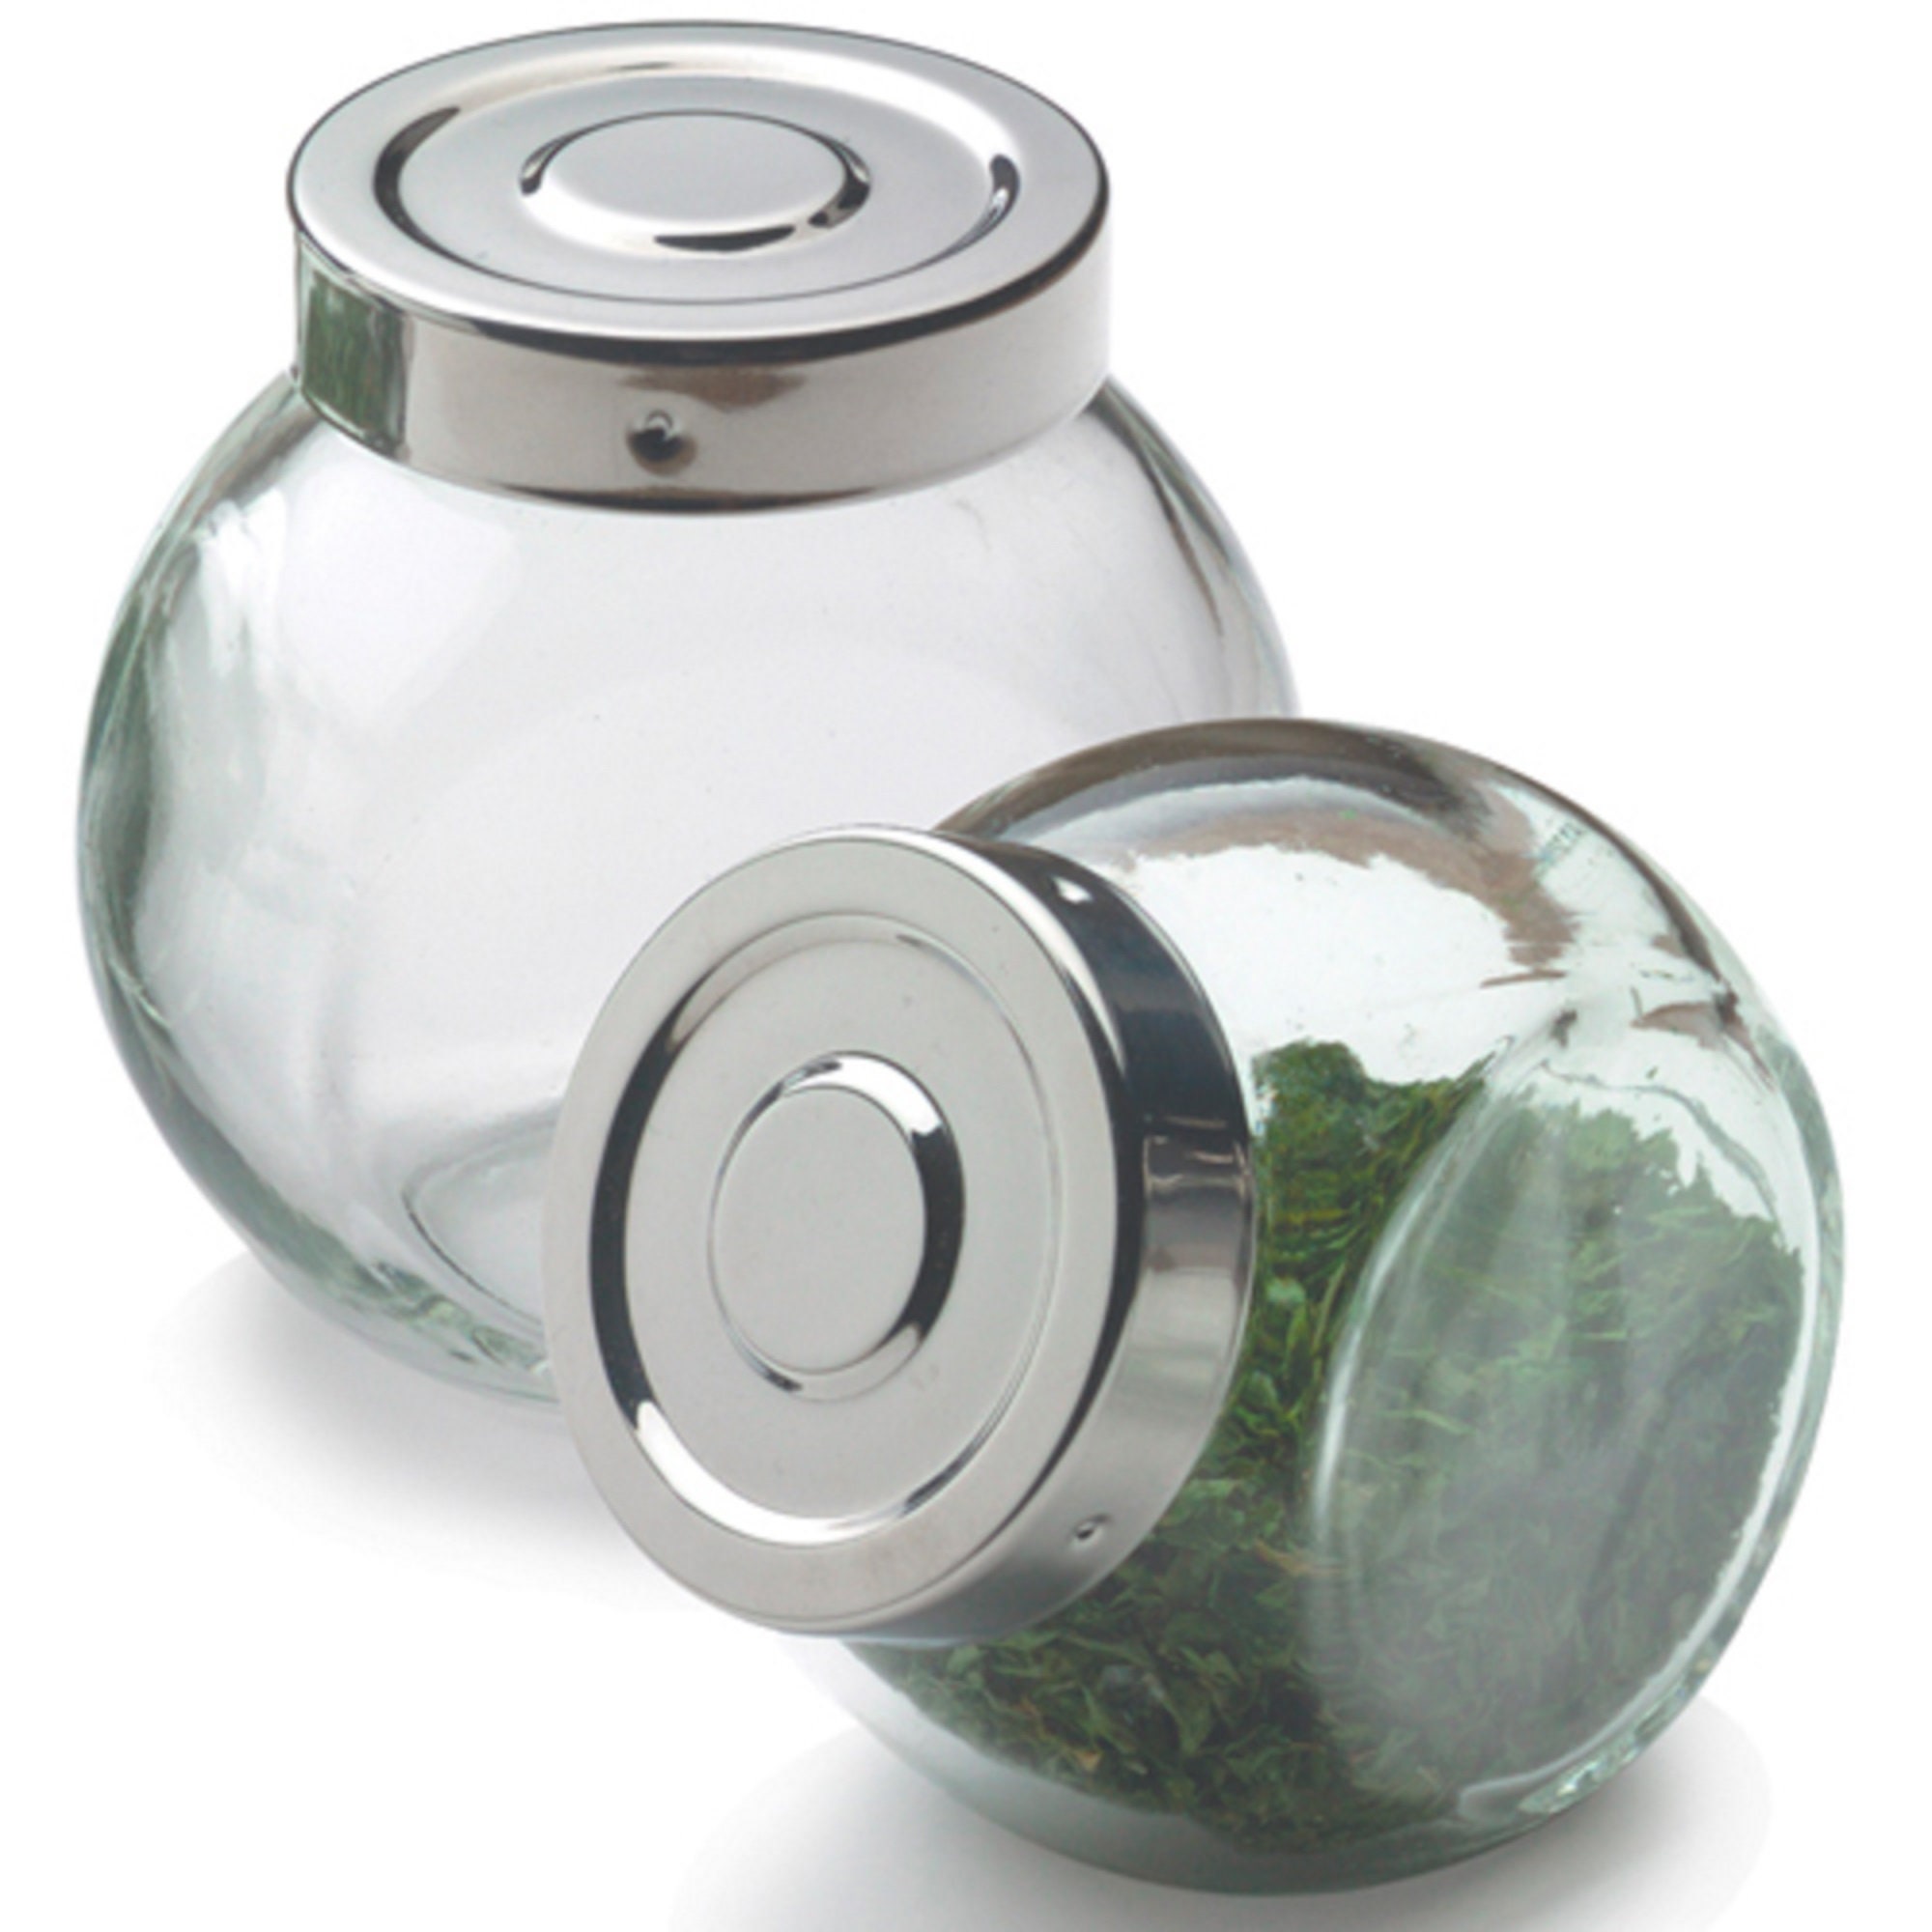 48 X Tilted Glass Spice Jar With Lids 200ml Small Round Glass